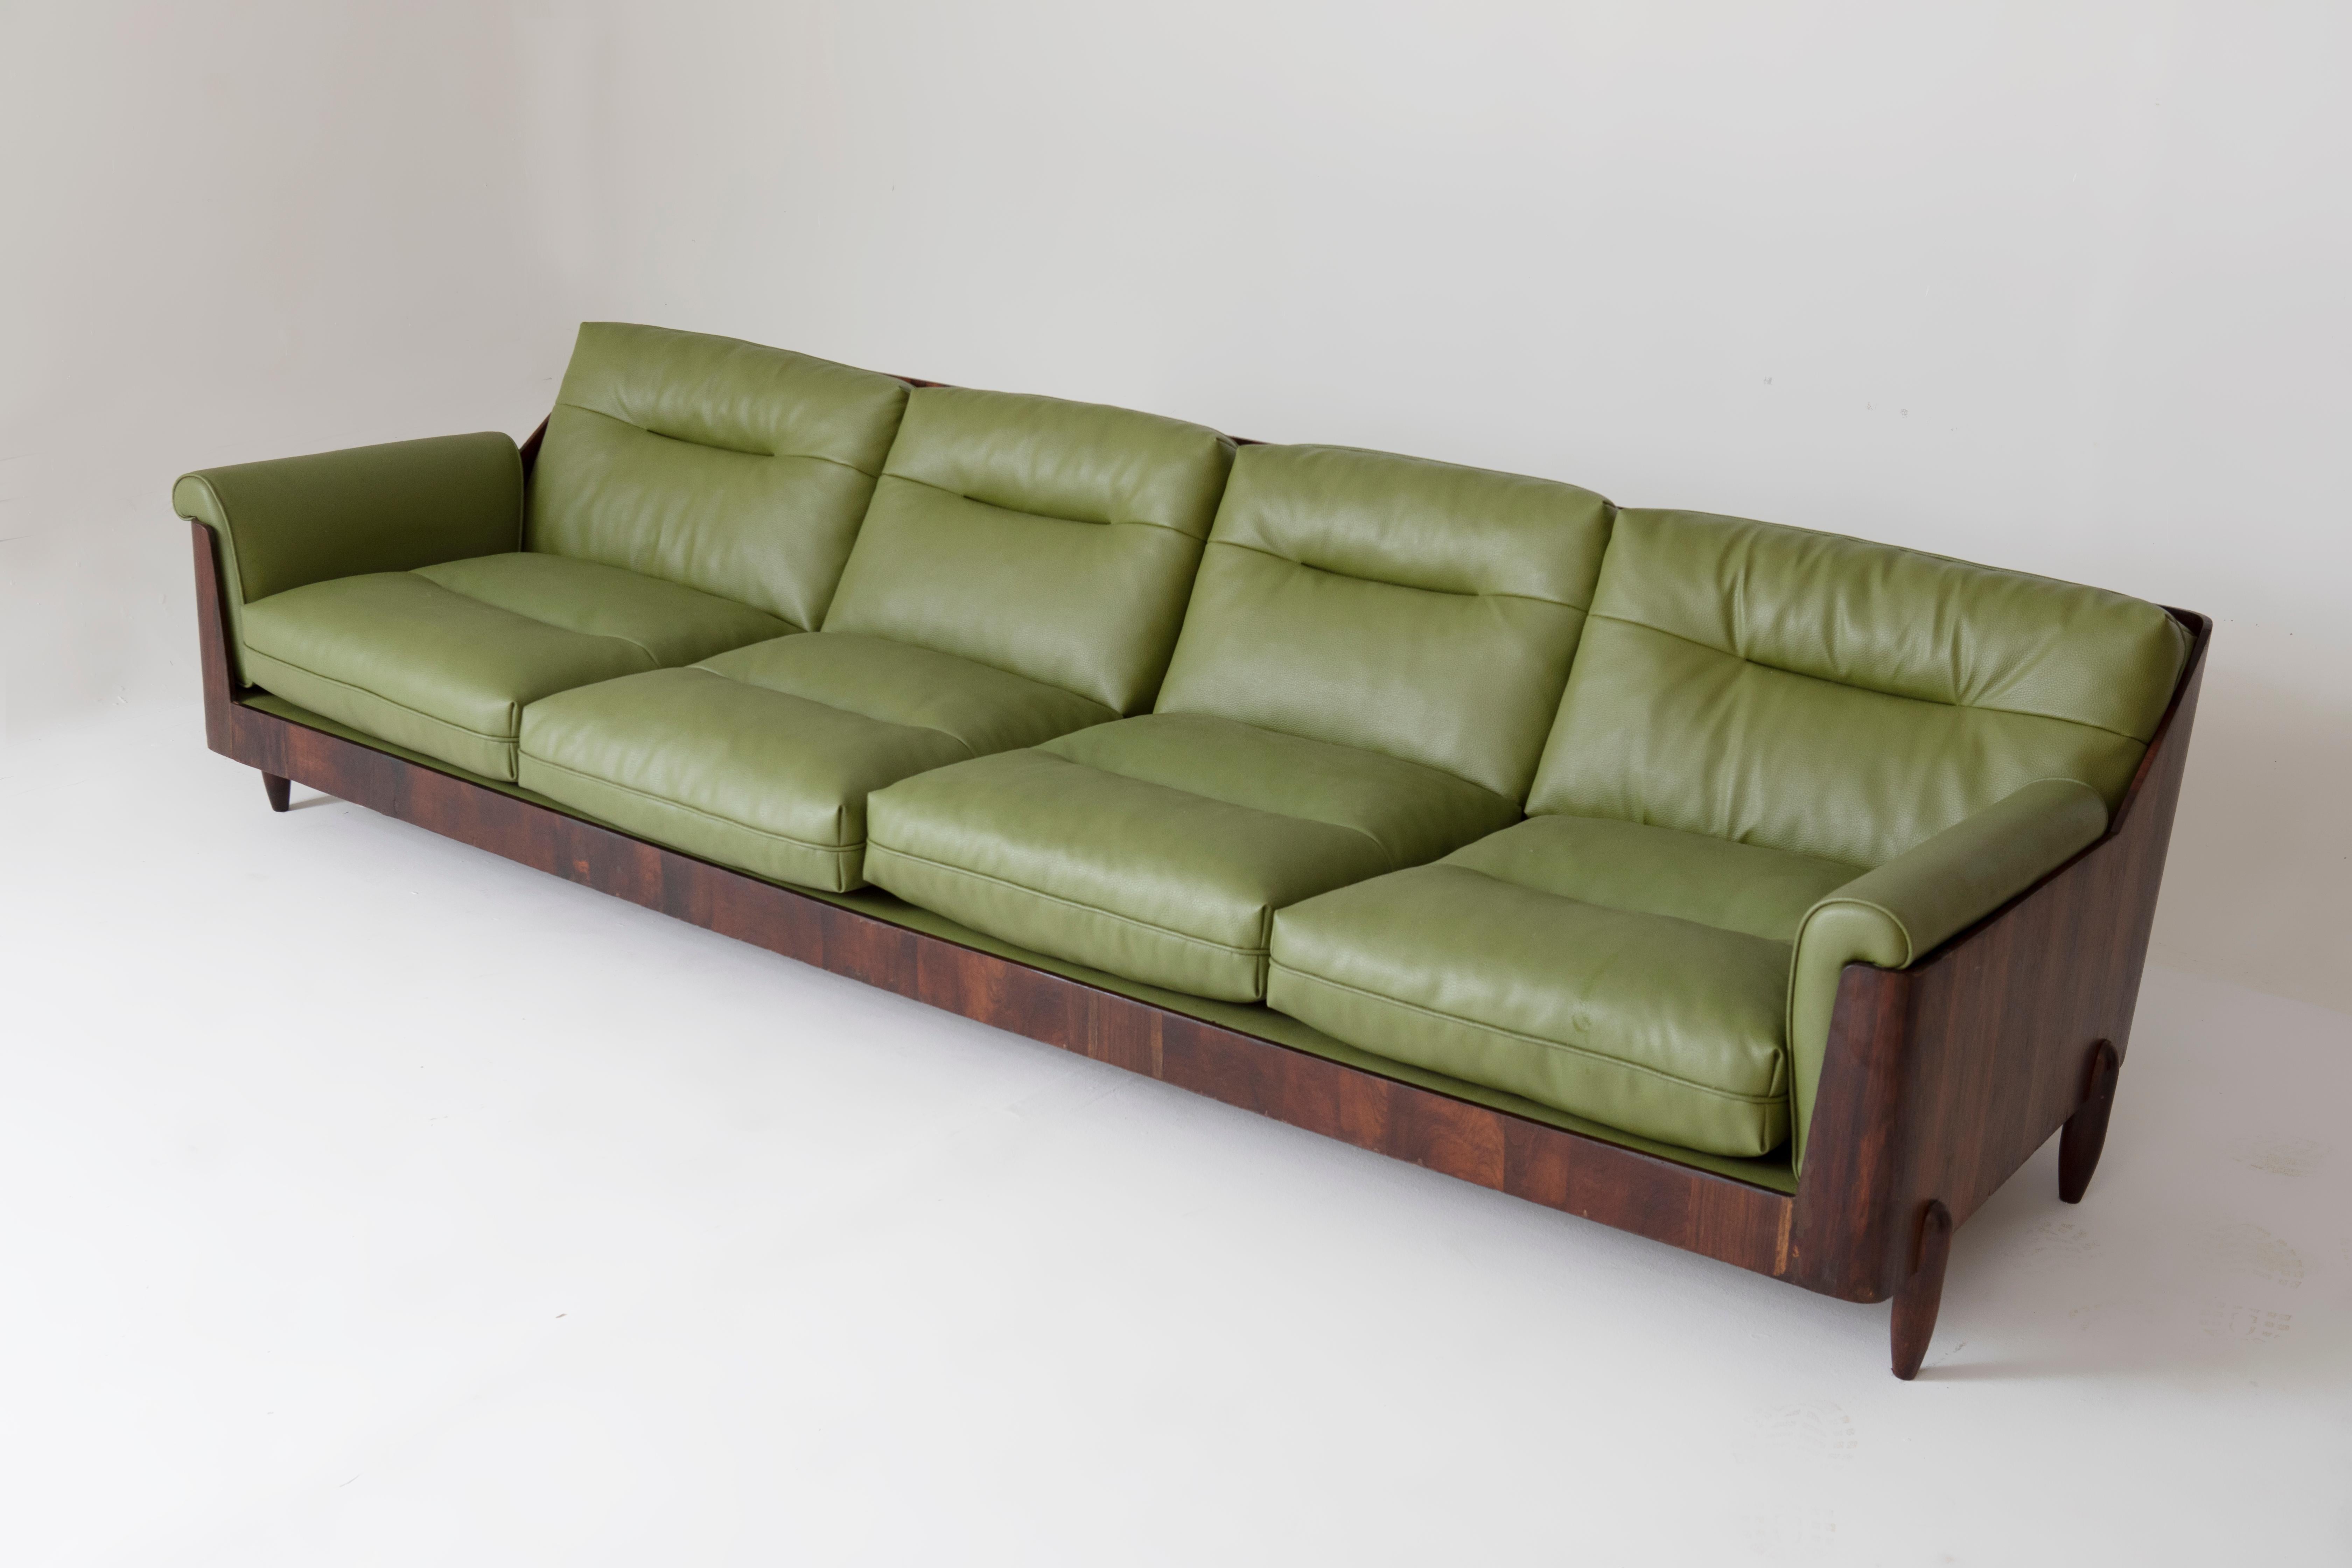 Mid-Century Modern Sofa by Novo Rumo, 1960s

Four-seater sofa manufactured by Novo Rumo, 1960s in Brazil is a great example of Brazilian Modern Design, blending functionality with aesthetic appeal. 
This sofa features a distinct hollow wooden frame,